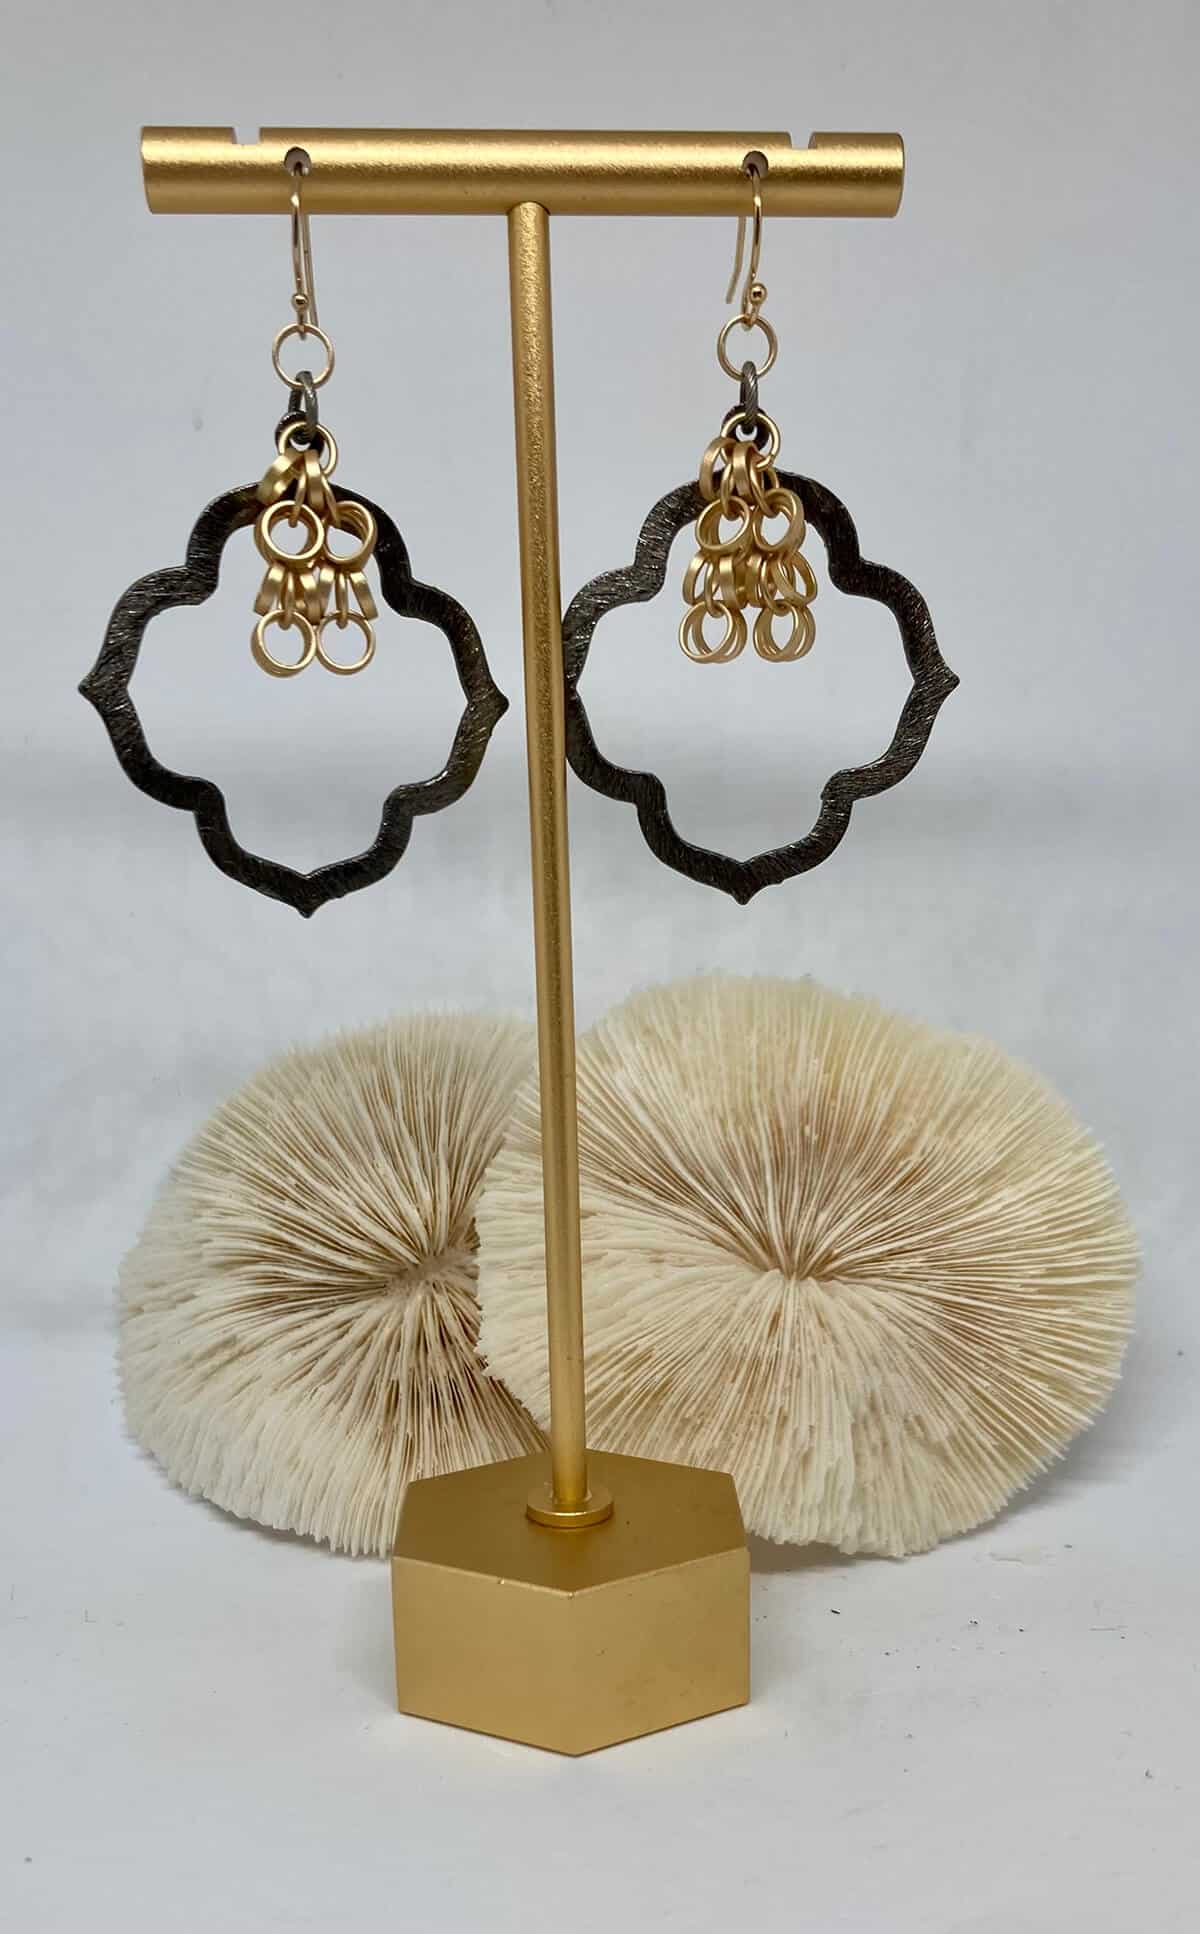 Black and gold earrings on a gold stand with white shells in the background.